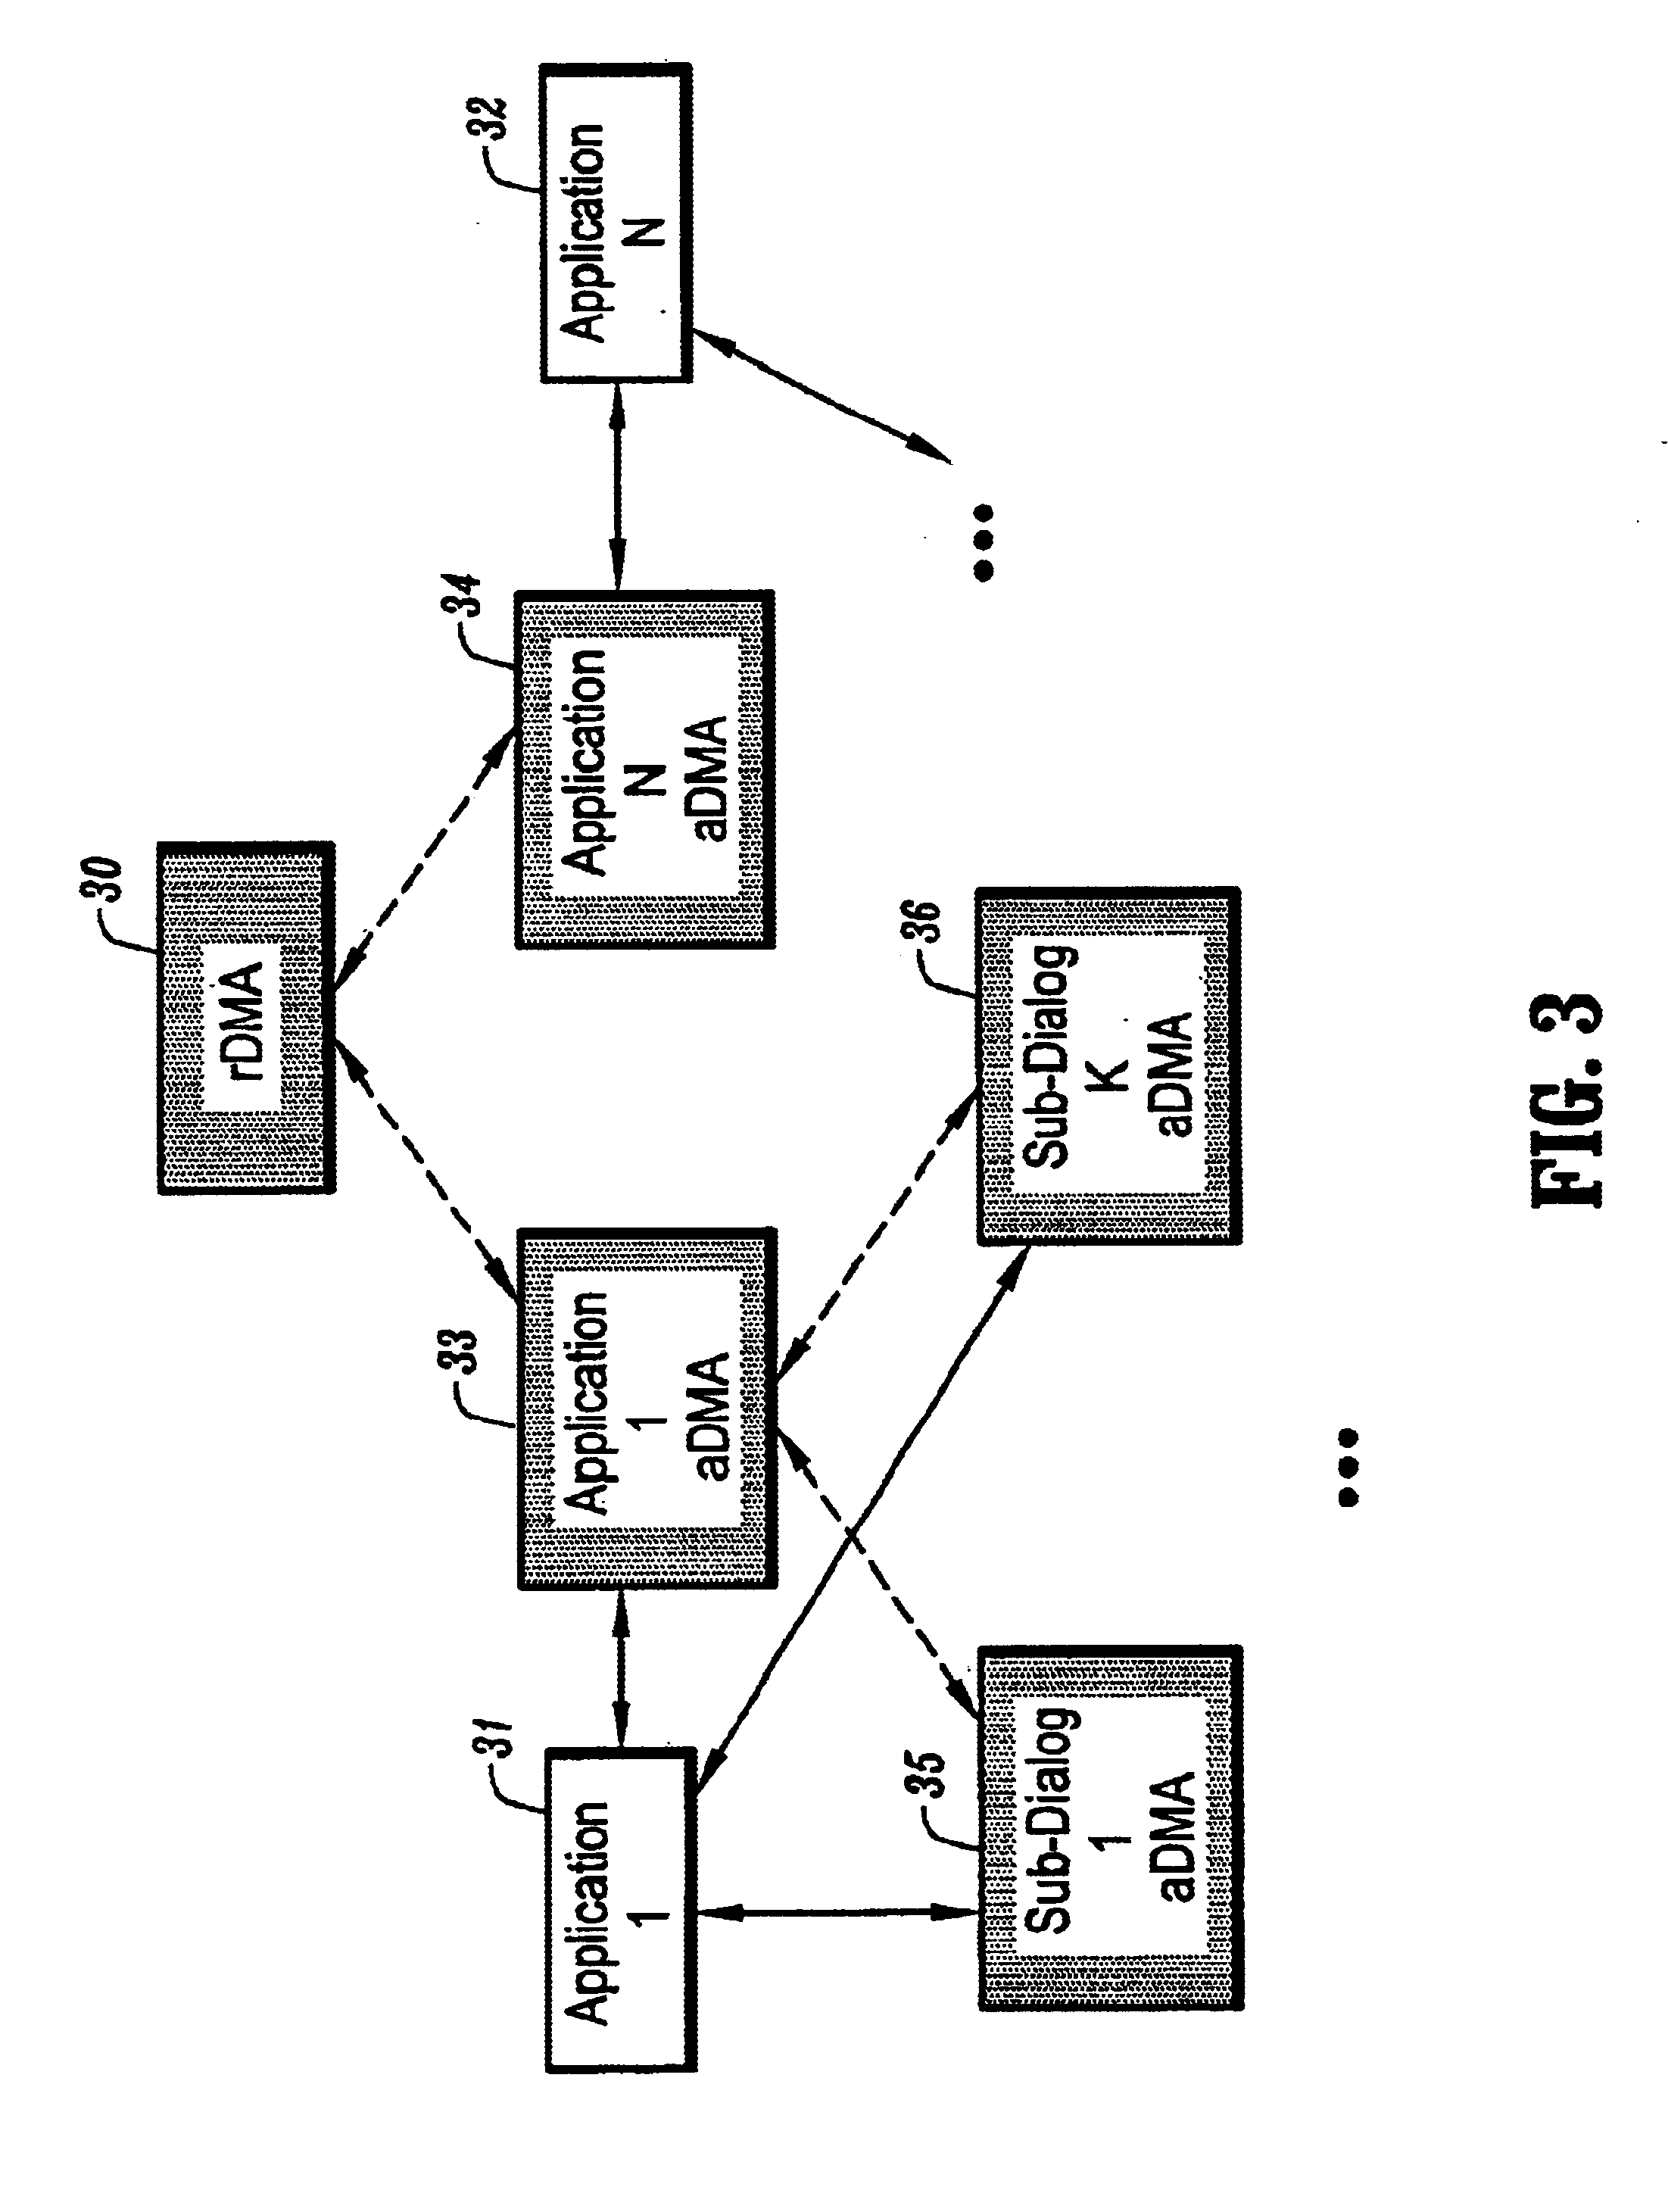 System and method for providing dialog management and arbitration in a multi-modal environment